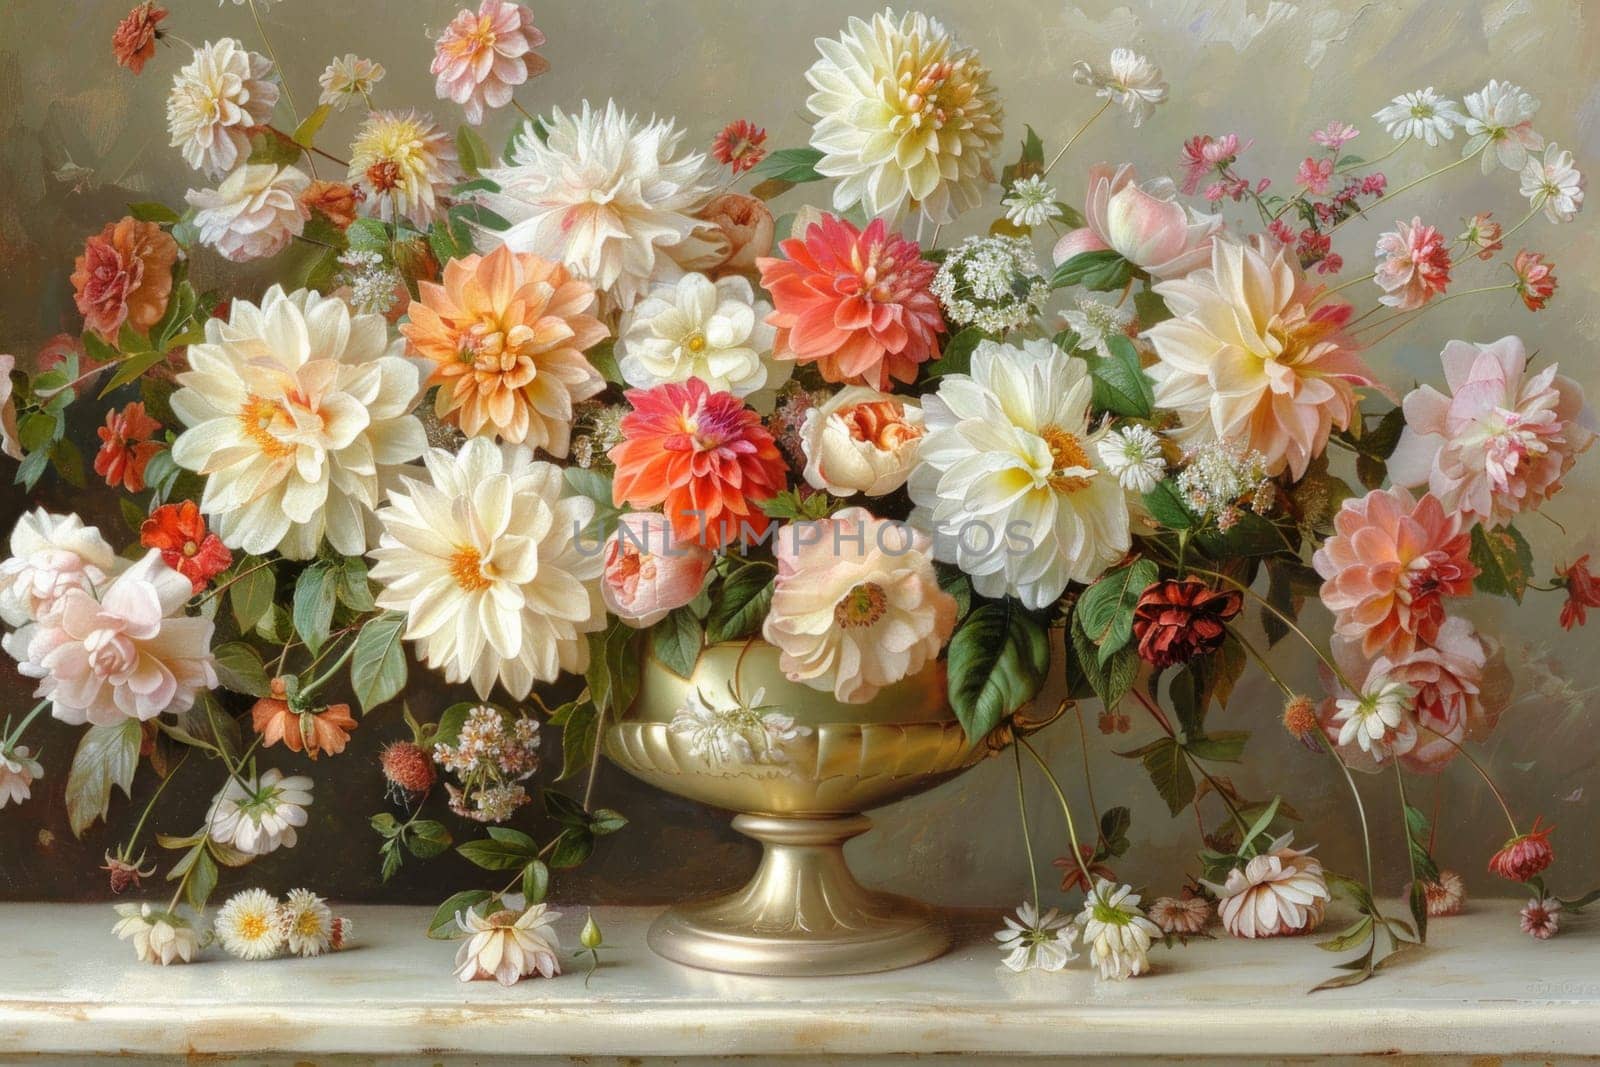 A beautifully detailed painting featuring vibrant flowers in a gold vase resting on a marble table.